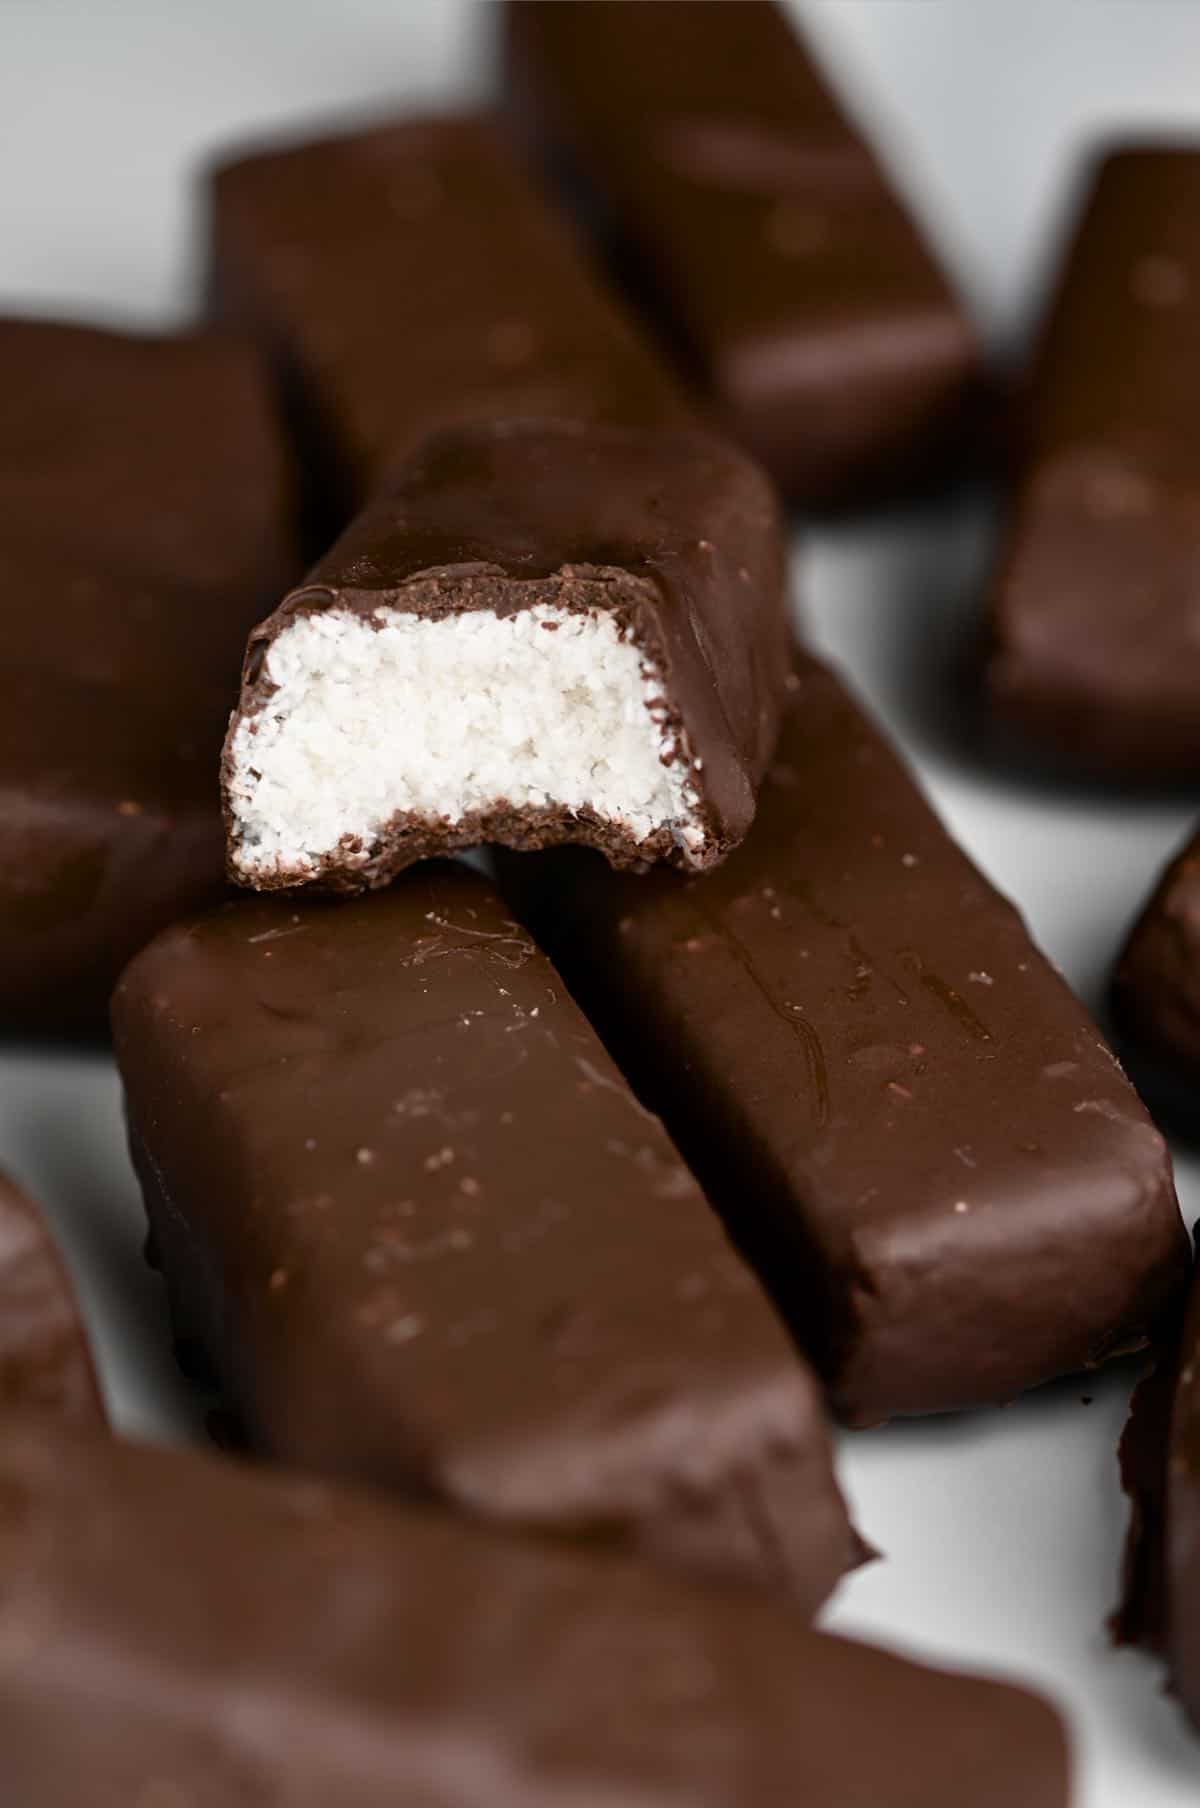 Some bounty bars on a flat surface and a half eaten bounty on top of them